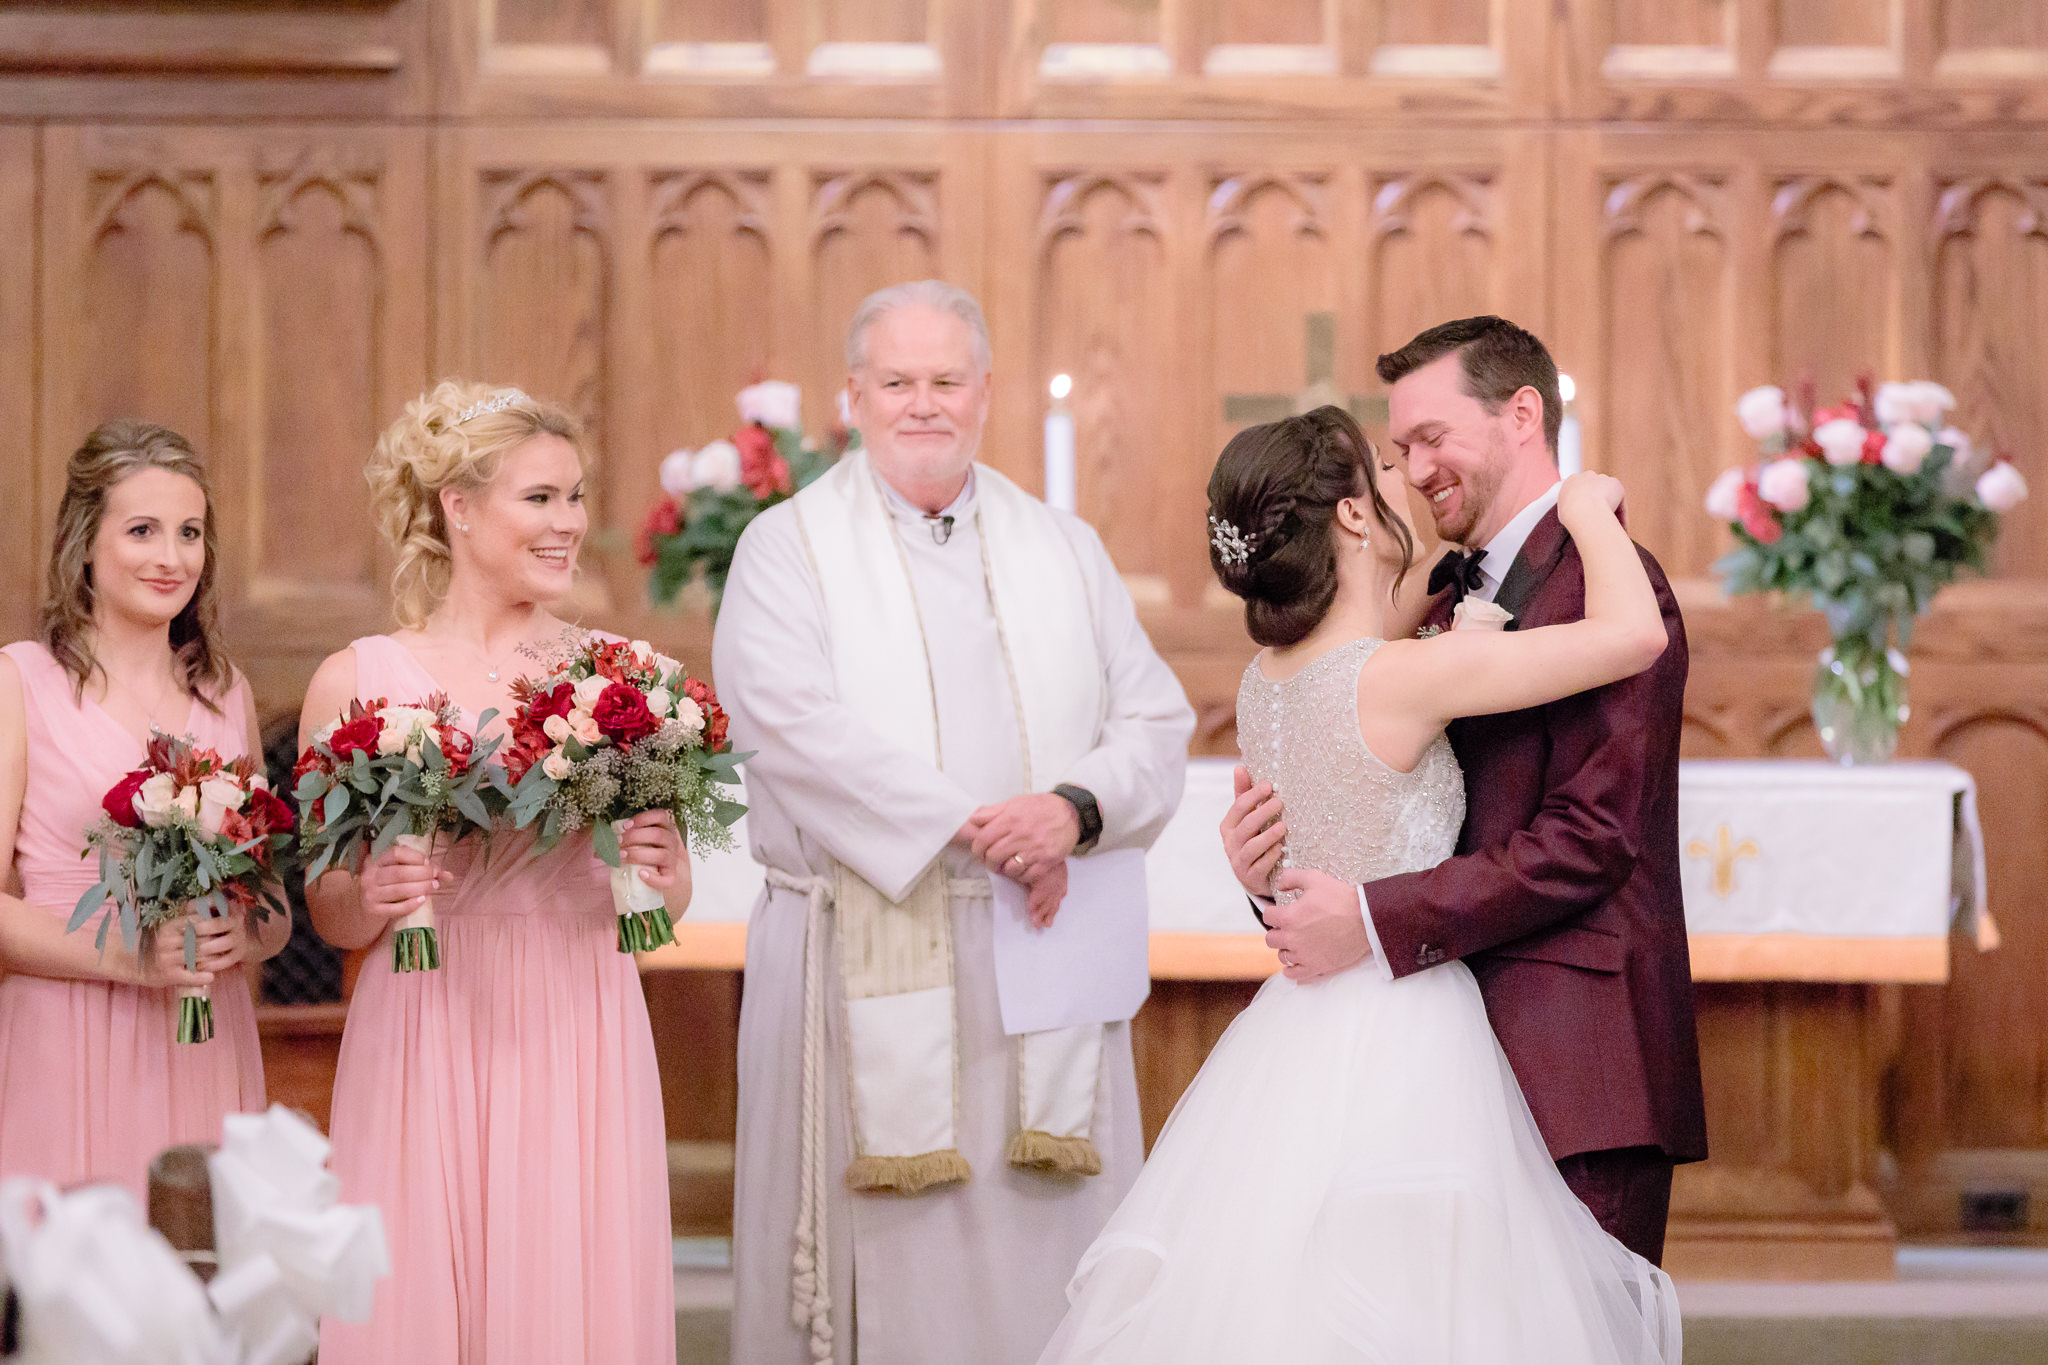 Just after the first kiss at a Smithfield United Church of Christ wedding